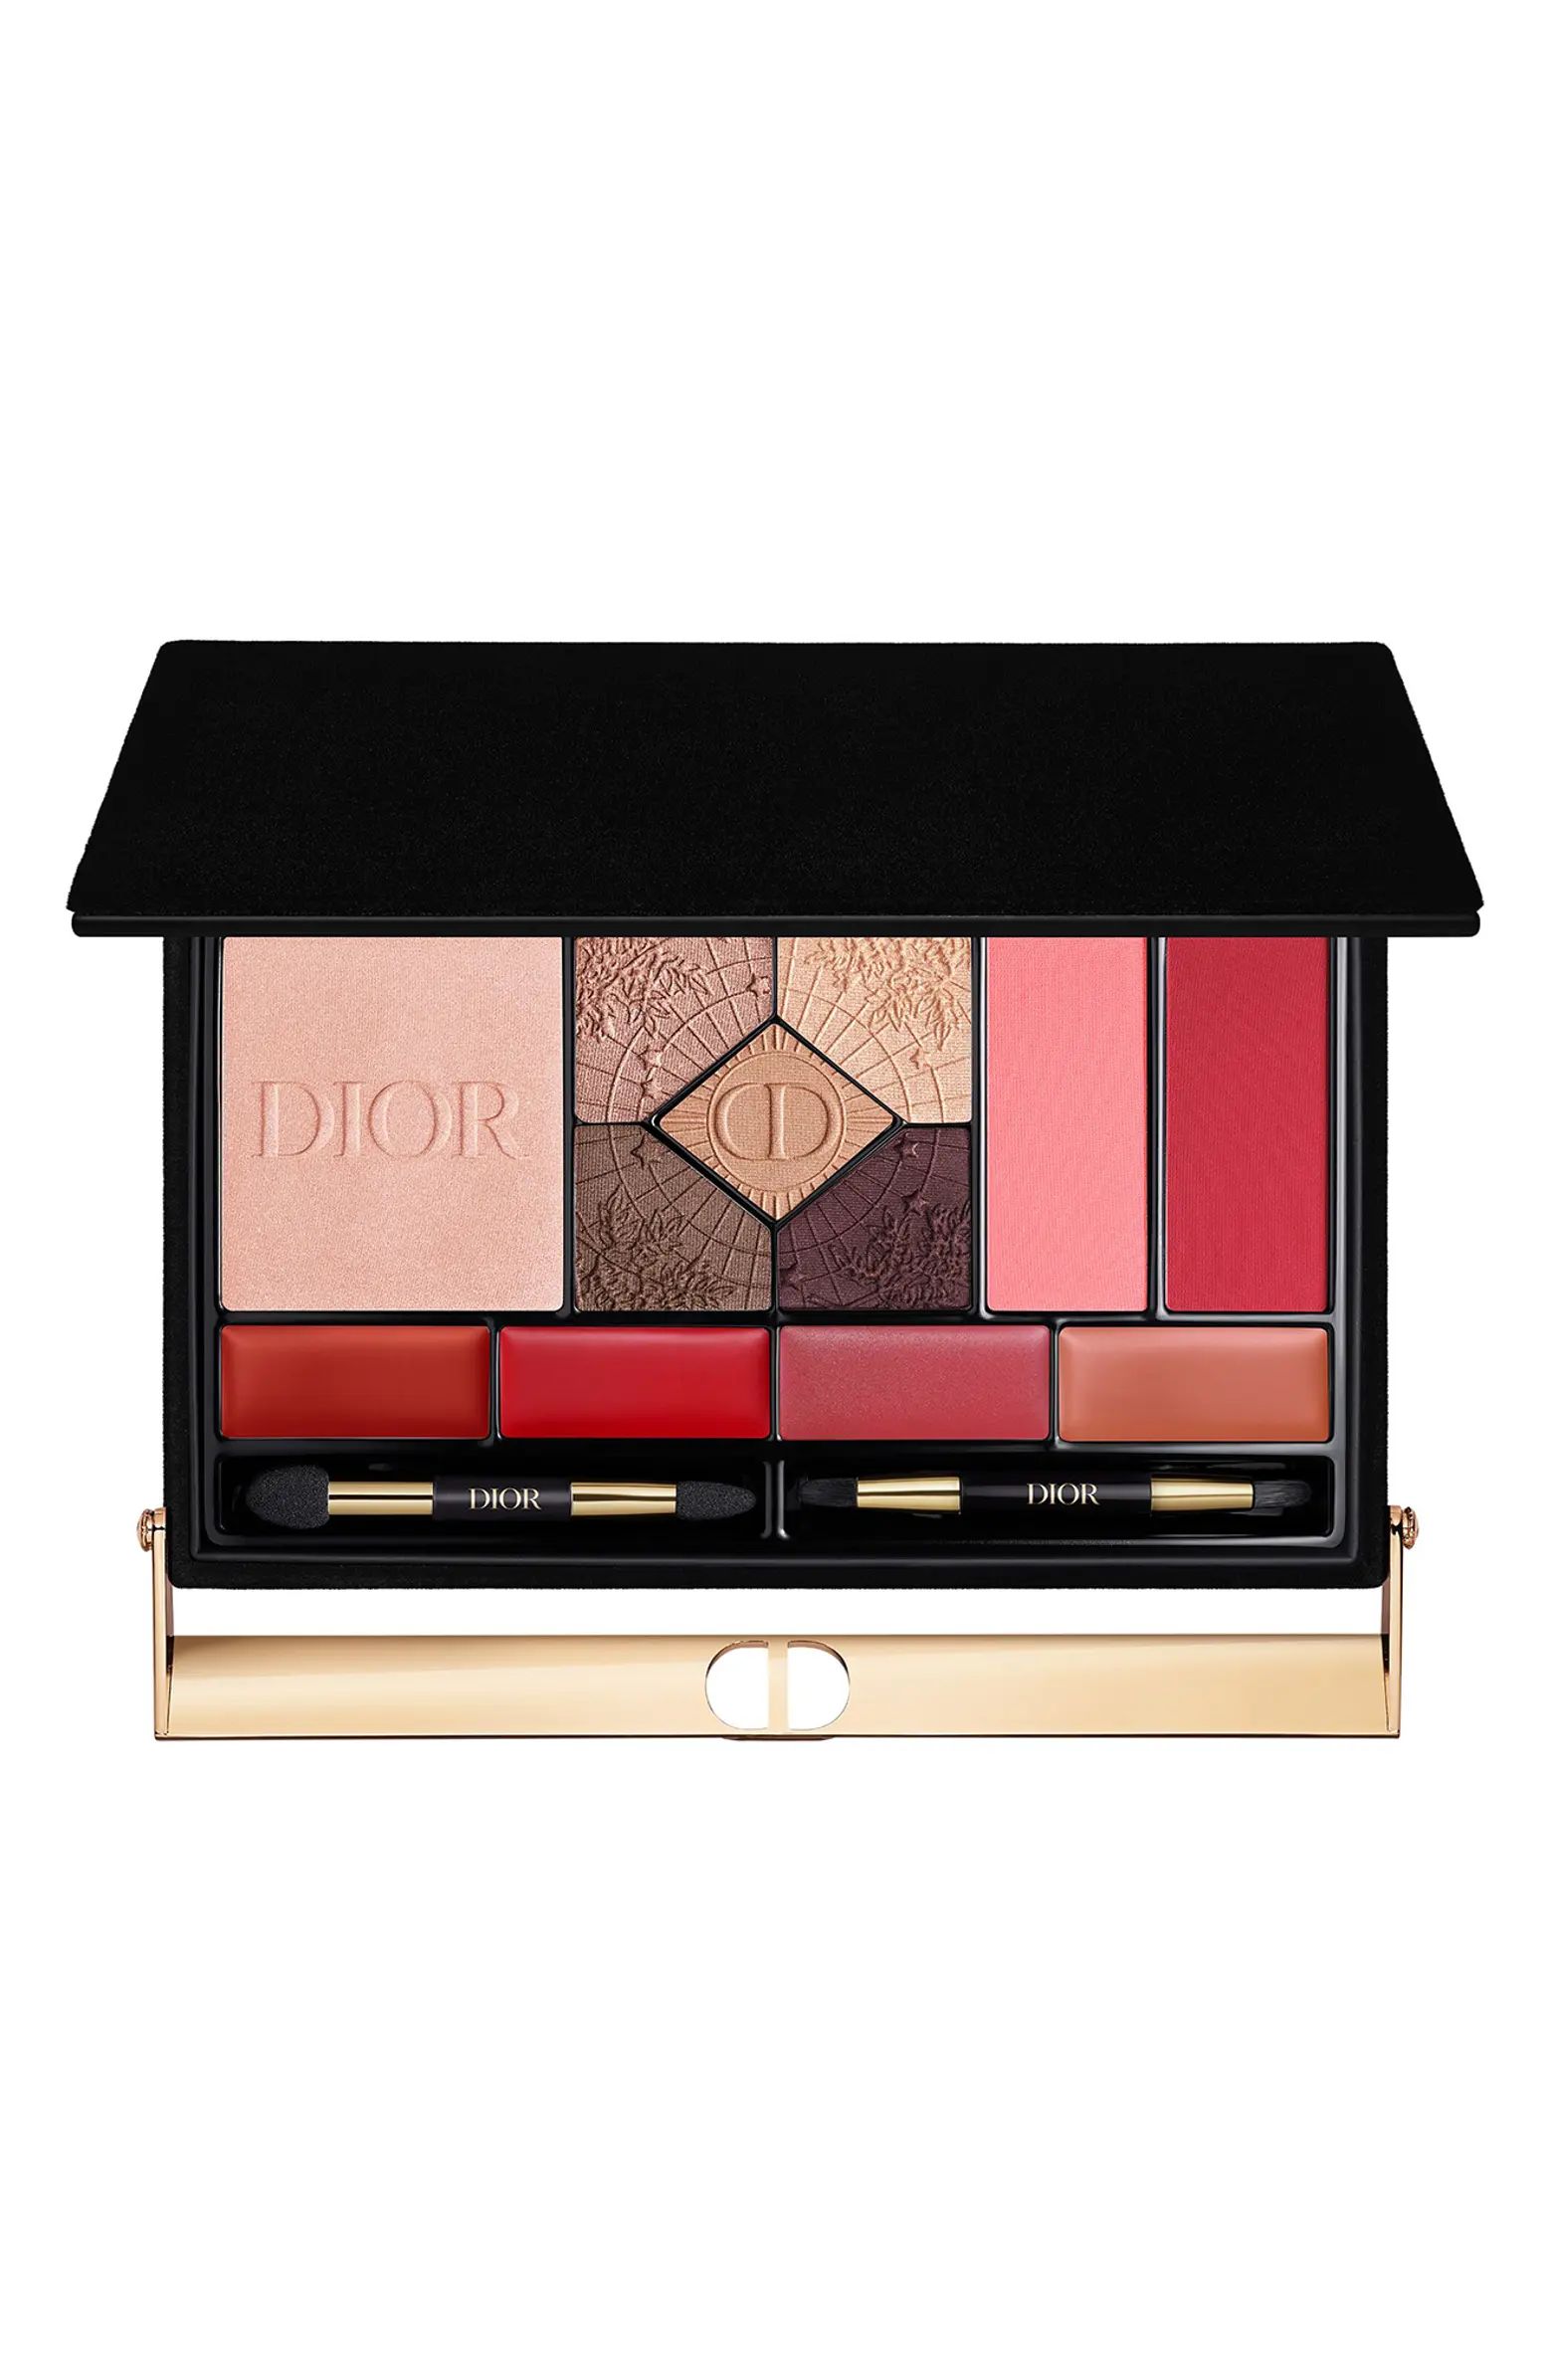 All-in-One Face, Lip & Eye Makeup Palette | Nordstrom